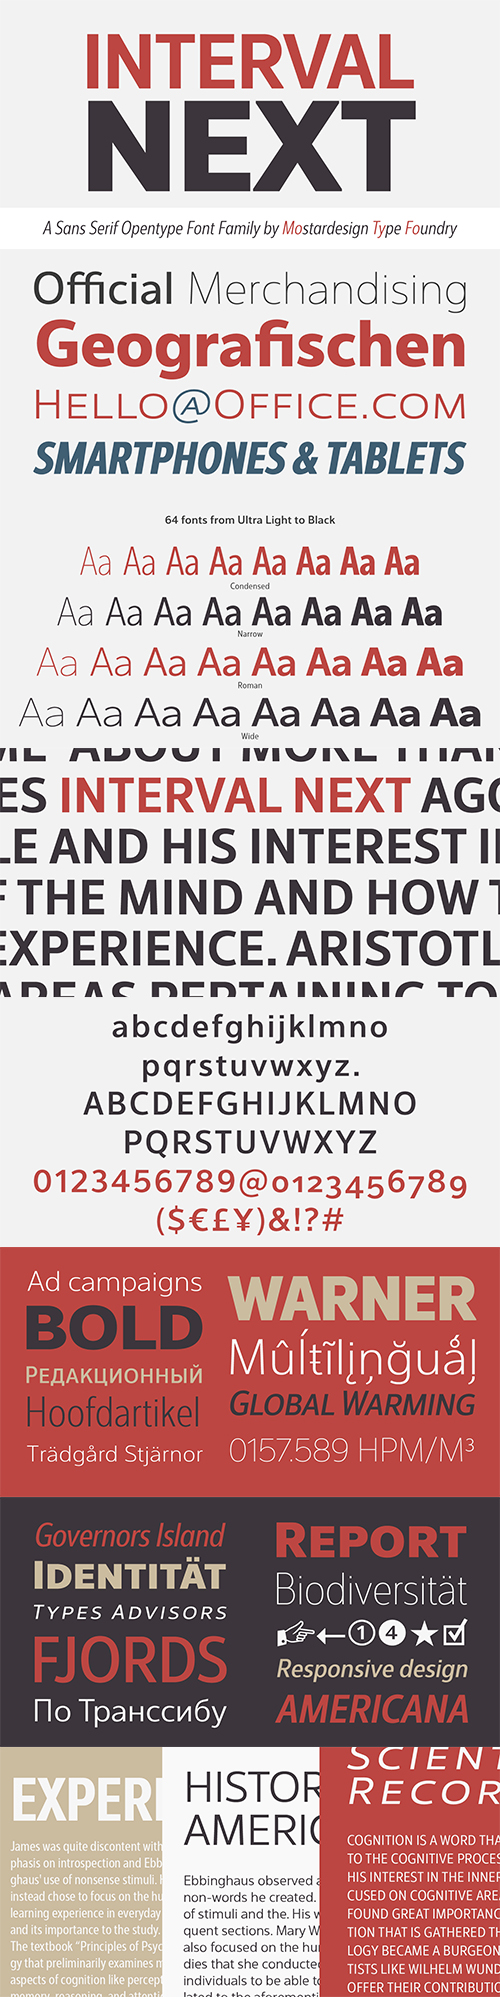 Interval Next font family